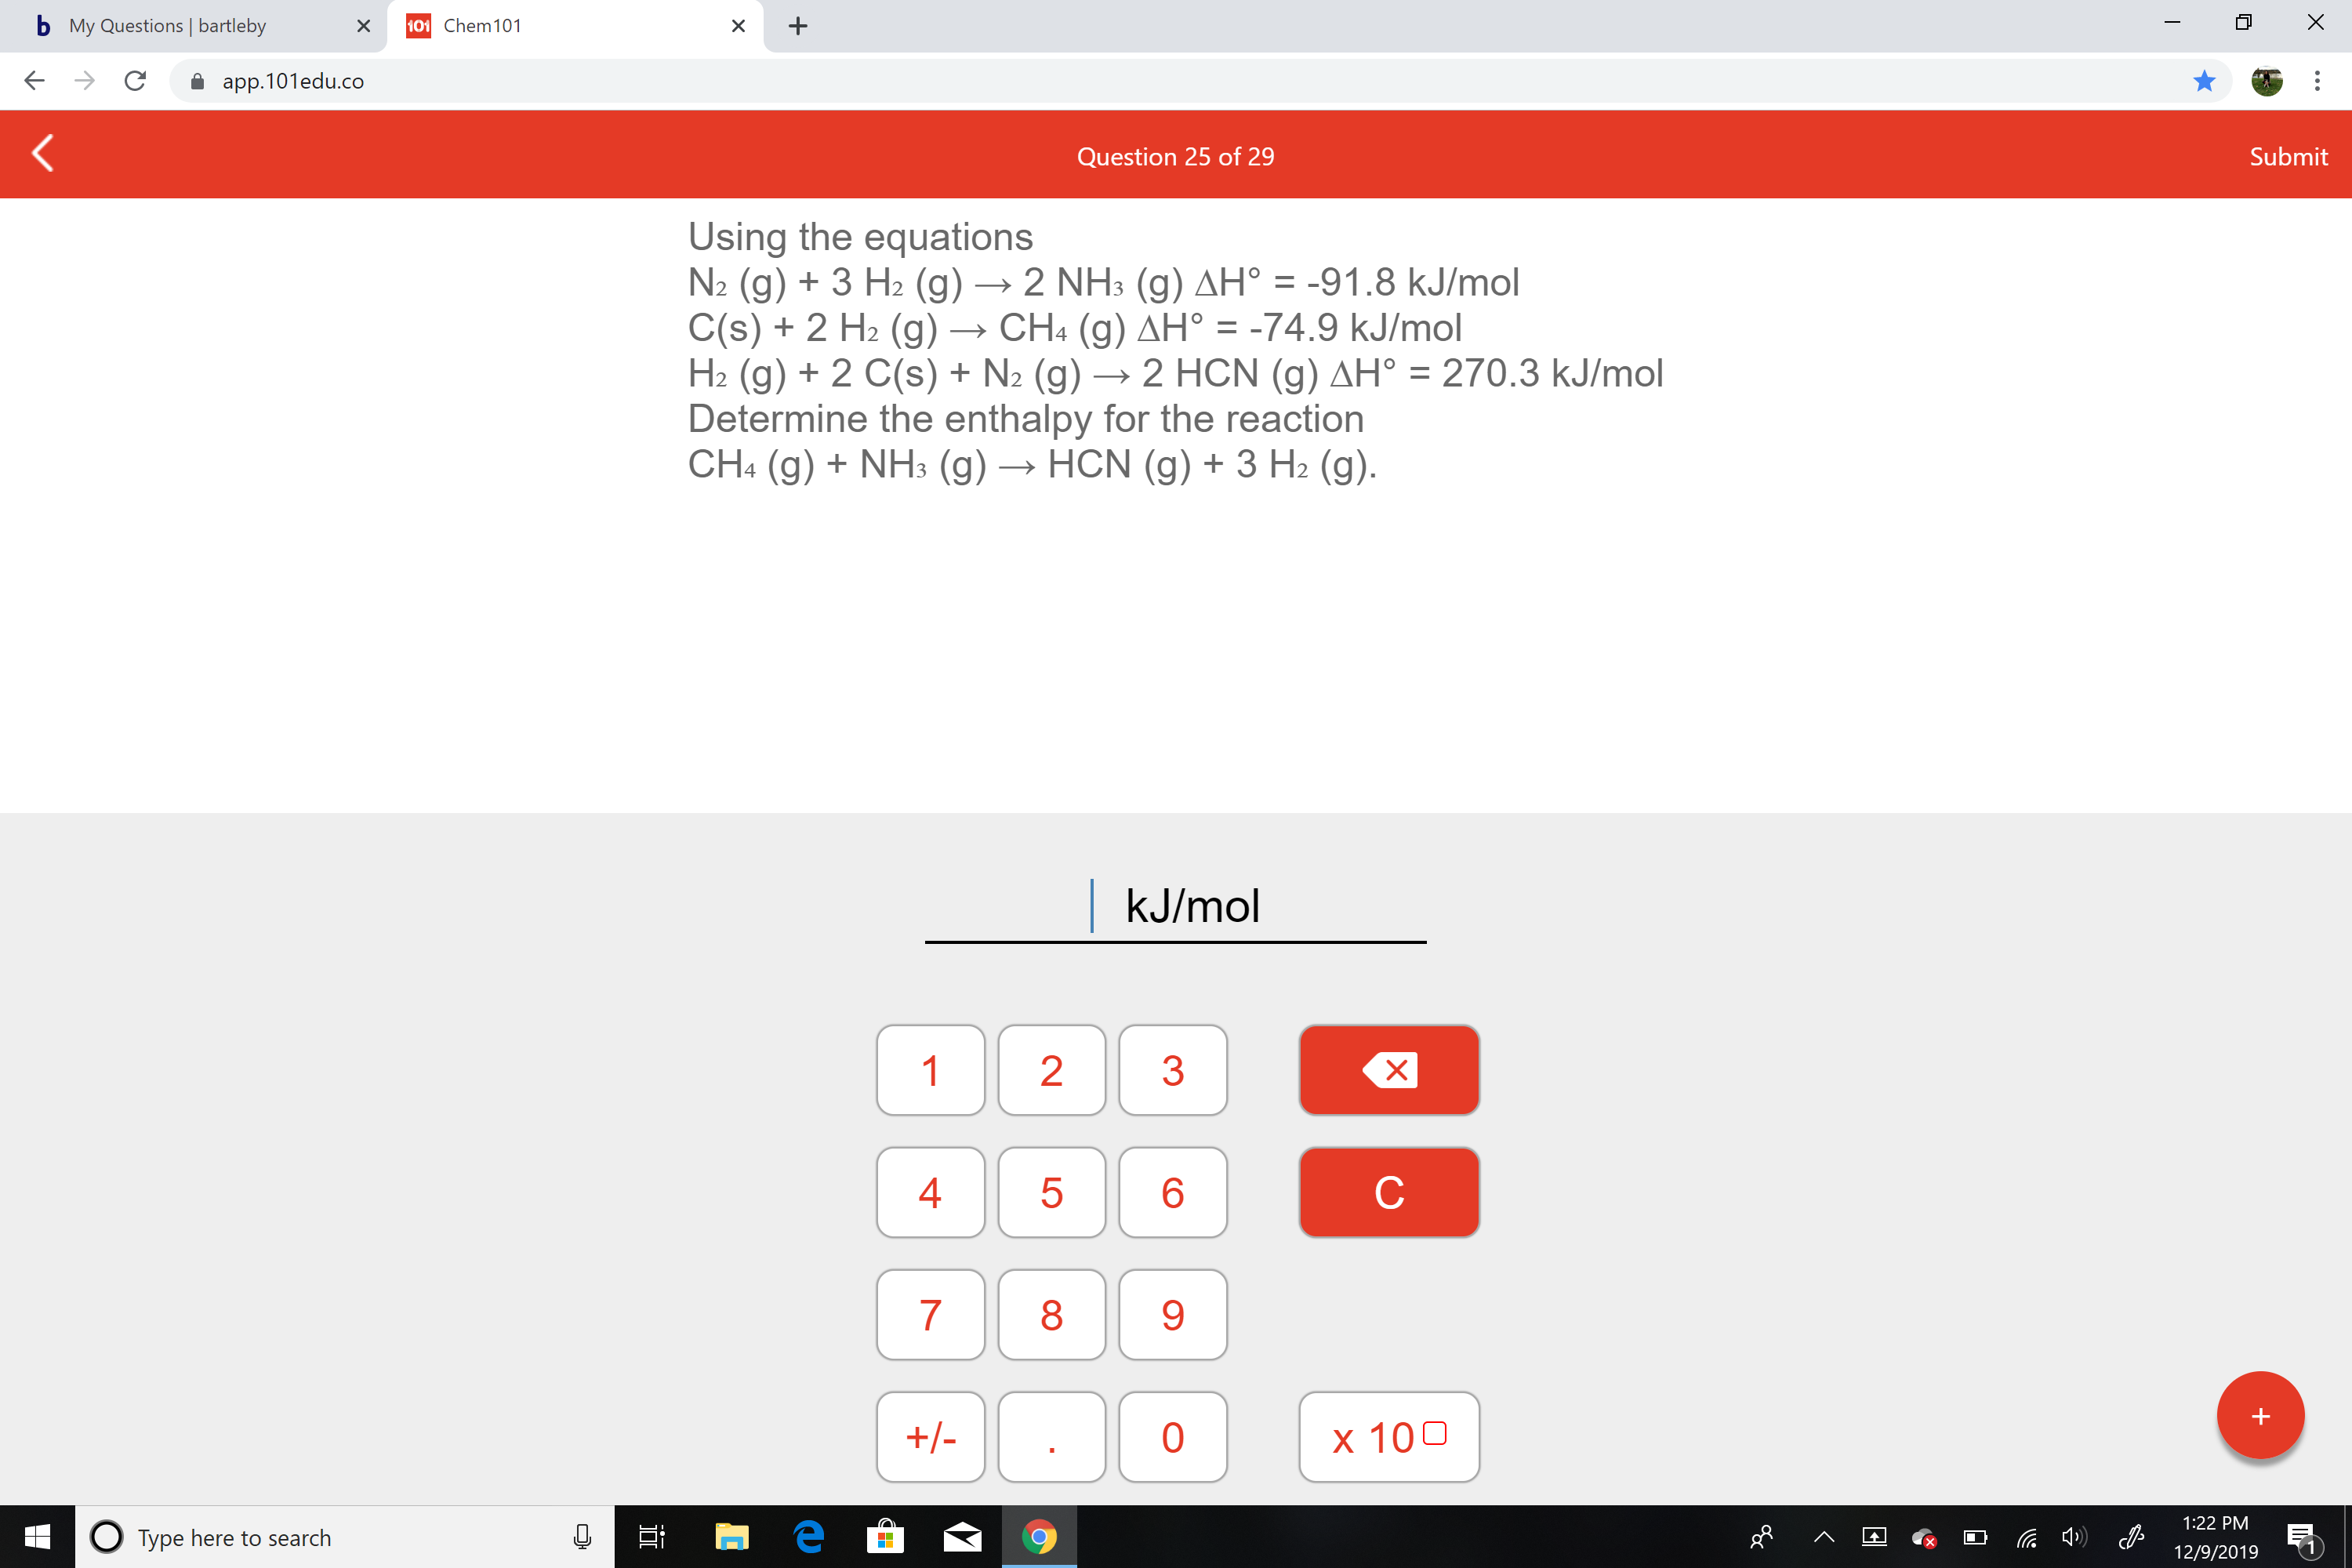 b My Questions | bartleby
101 Chem101
app.101edu.co
Submit
Question 25 of 29
Using the equations
N2 (g) + 3 H2 (g) → 2 NH3 (g) AH° = -91.8 kJ/mol
C(s) + 2 H2 (g) →
H2 (g) + 2 C(s) + N2 (g) → 2 HCN (g) AH° = 270.3 kJ/mol
Determine the enthalpy for the reaction
CH4 (g) + NH3 (g) → HCN (g) + 3 H2 (g).
→ CH4 (g) AH° = -74.9 kJ/mol
%3D
| kJ/mol
1
3
4
8
9.
+/-
x 100
1:22 PM
O Type here to search
12/9/2019
LO
